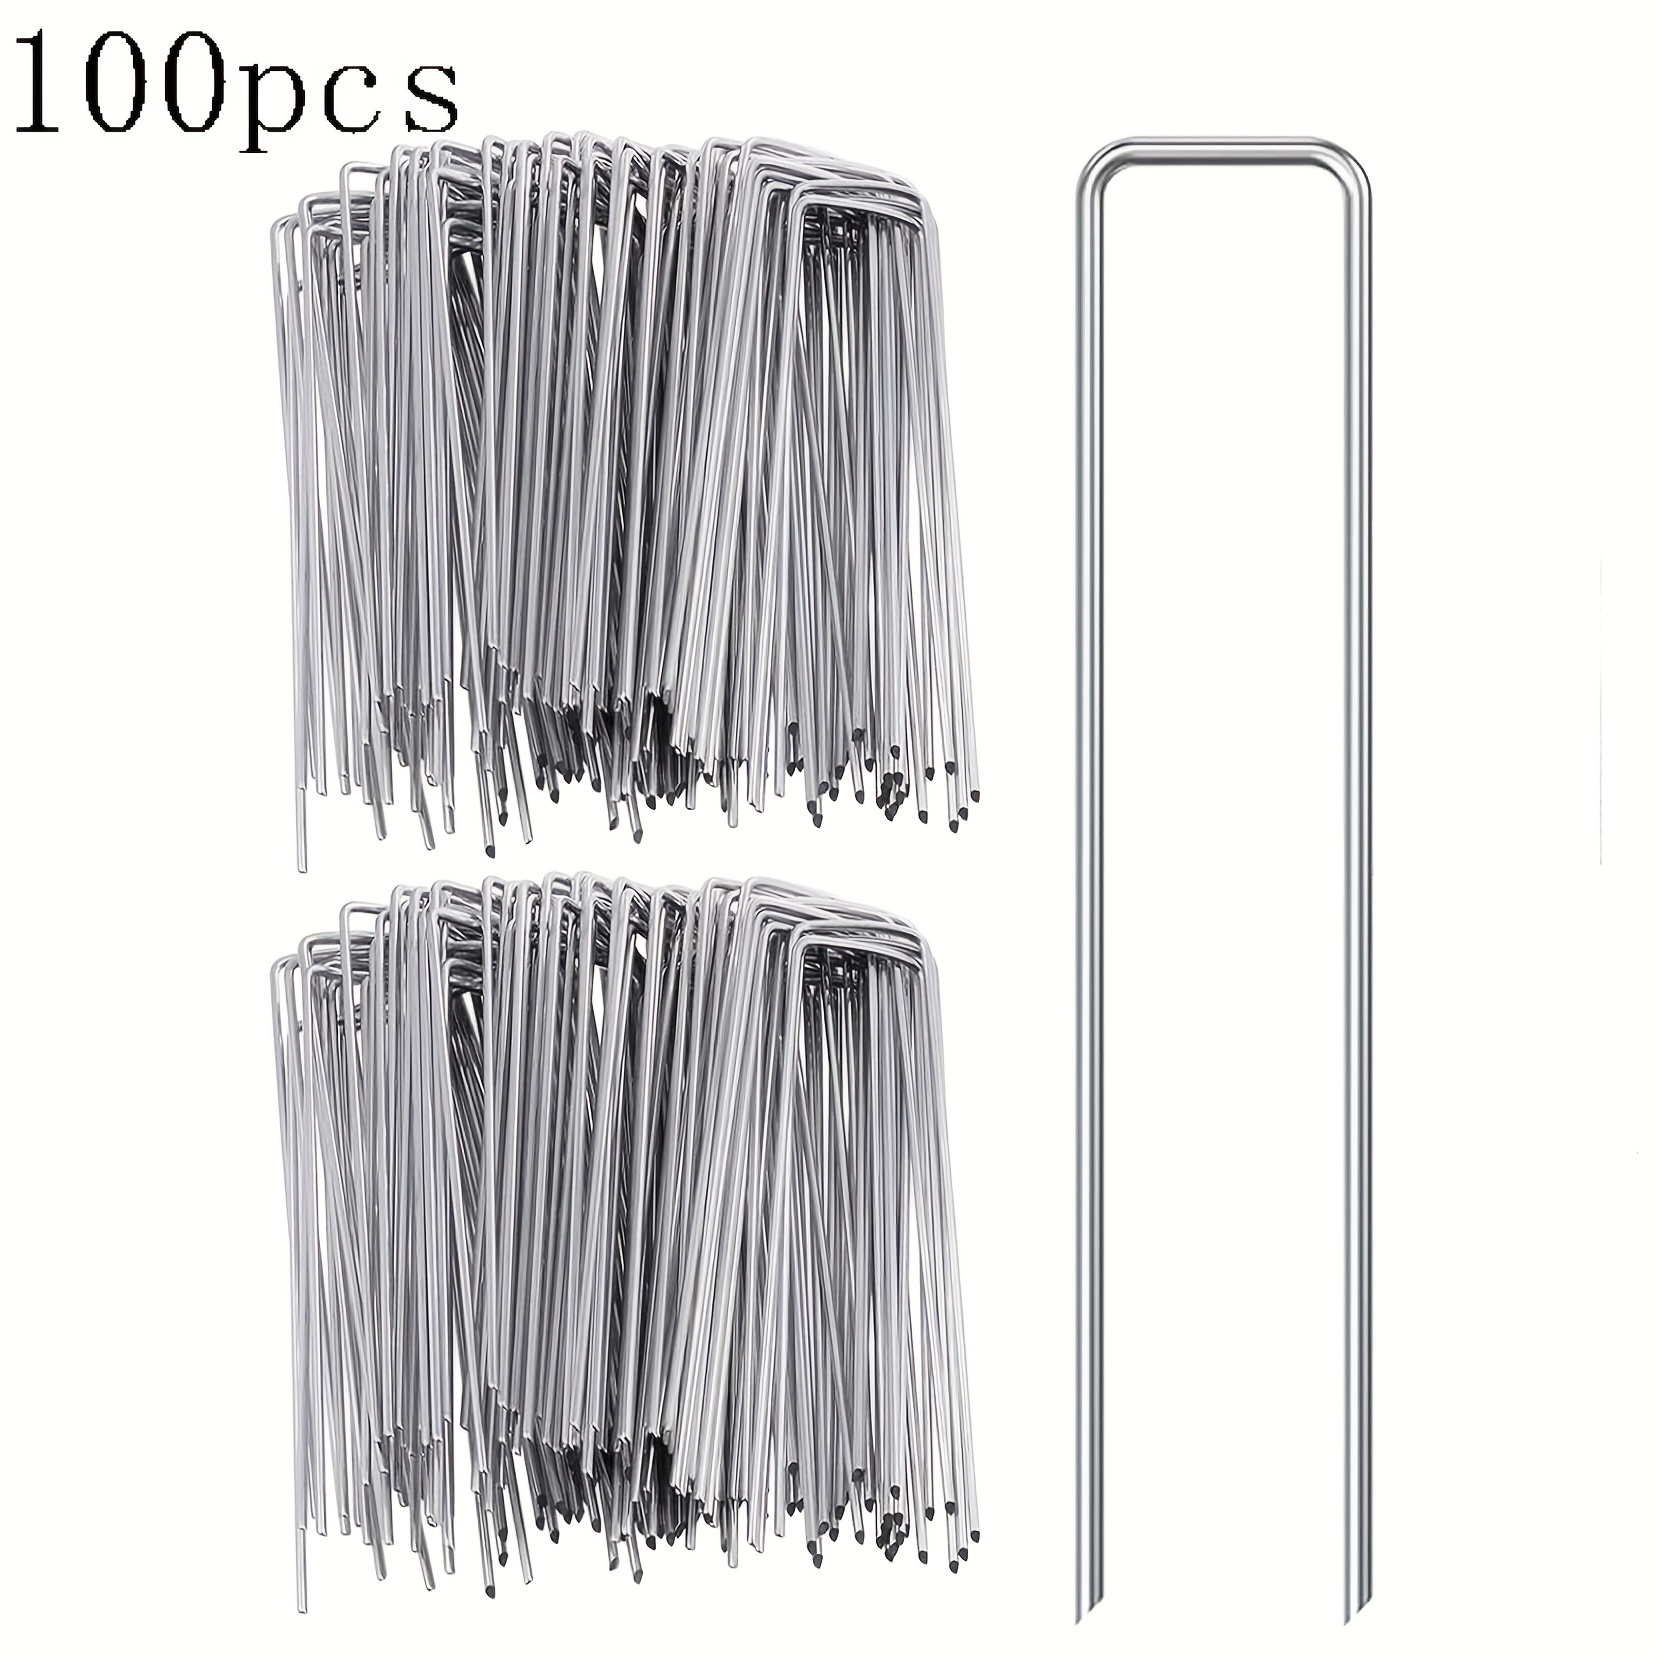 

100 Packs, 5.8 Inch Heavy Duty U-shaped Garden Stakes Staples Securing Pegs For Securing Weed Fabric Landscape Ground Cover Fabric Netting Ground Sheets And Fleece Gauge Galvanized Steel